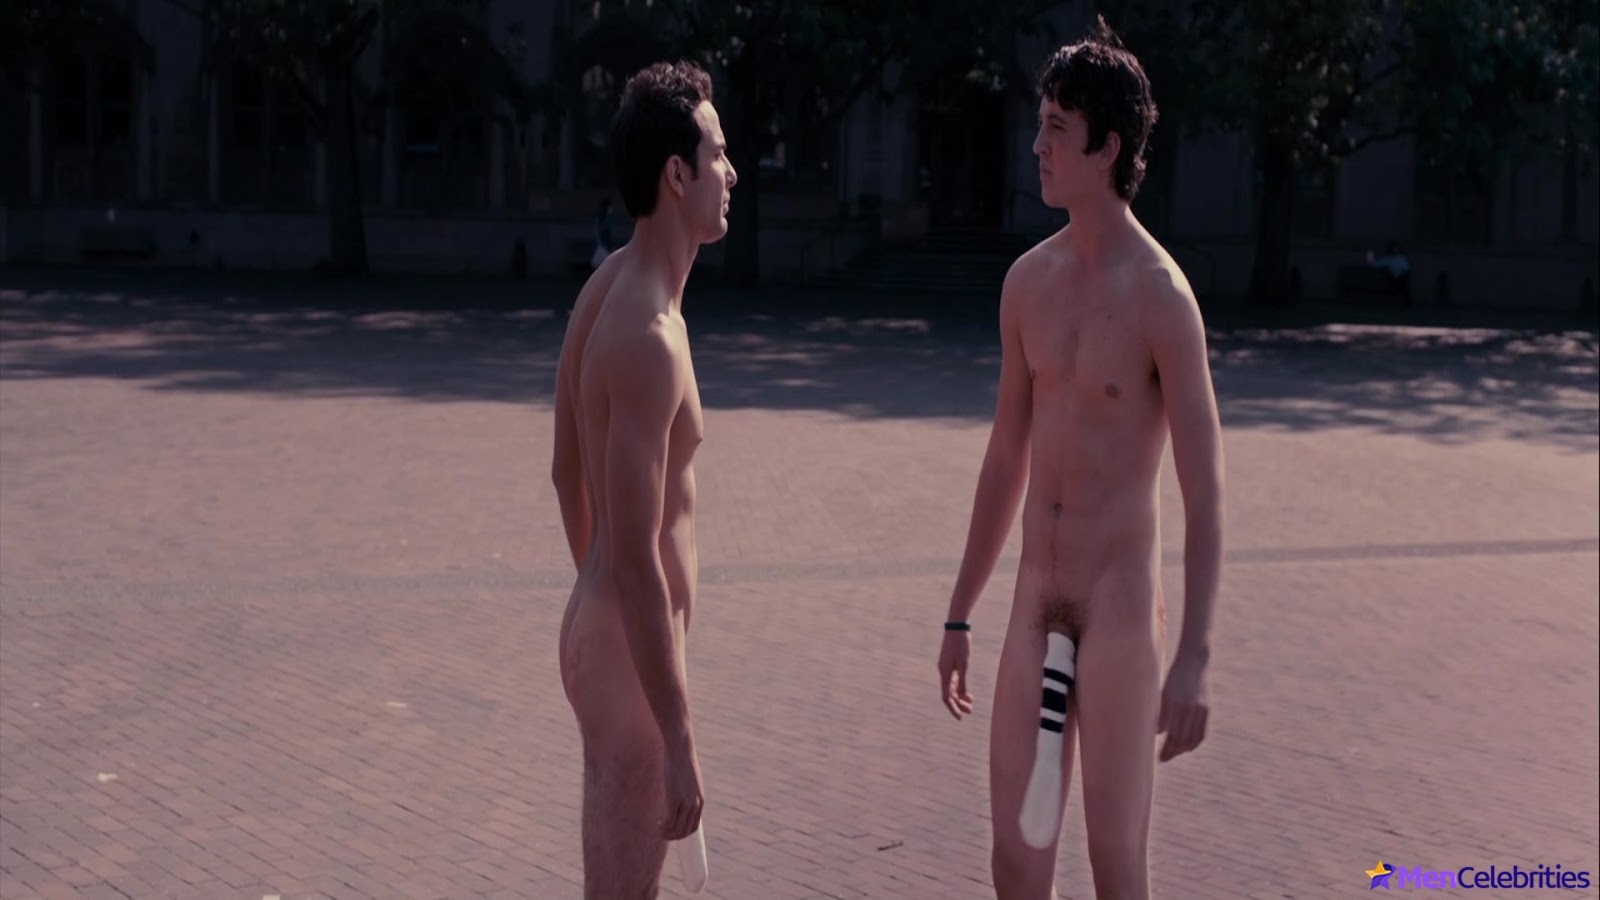 And now it’s time to move on to the most juicy - Miles Teller nude and naug...